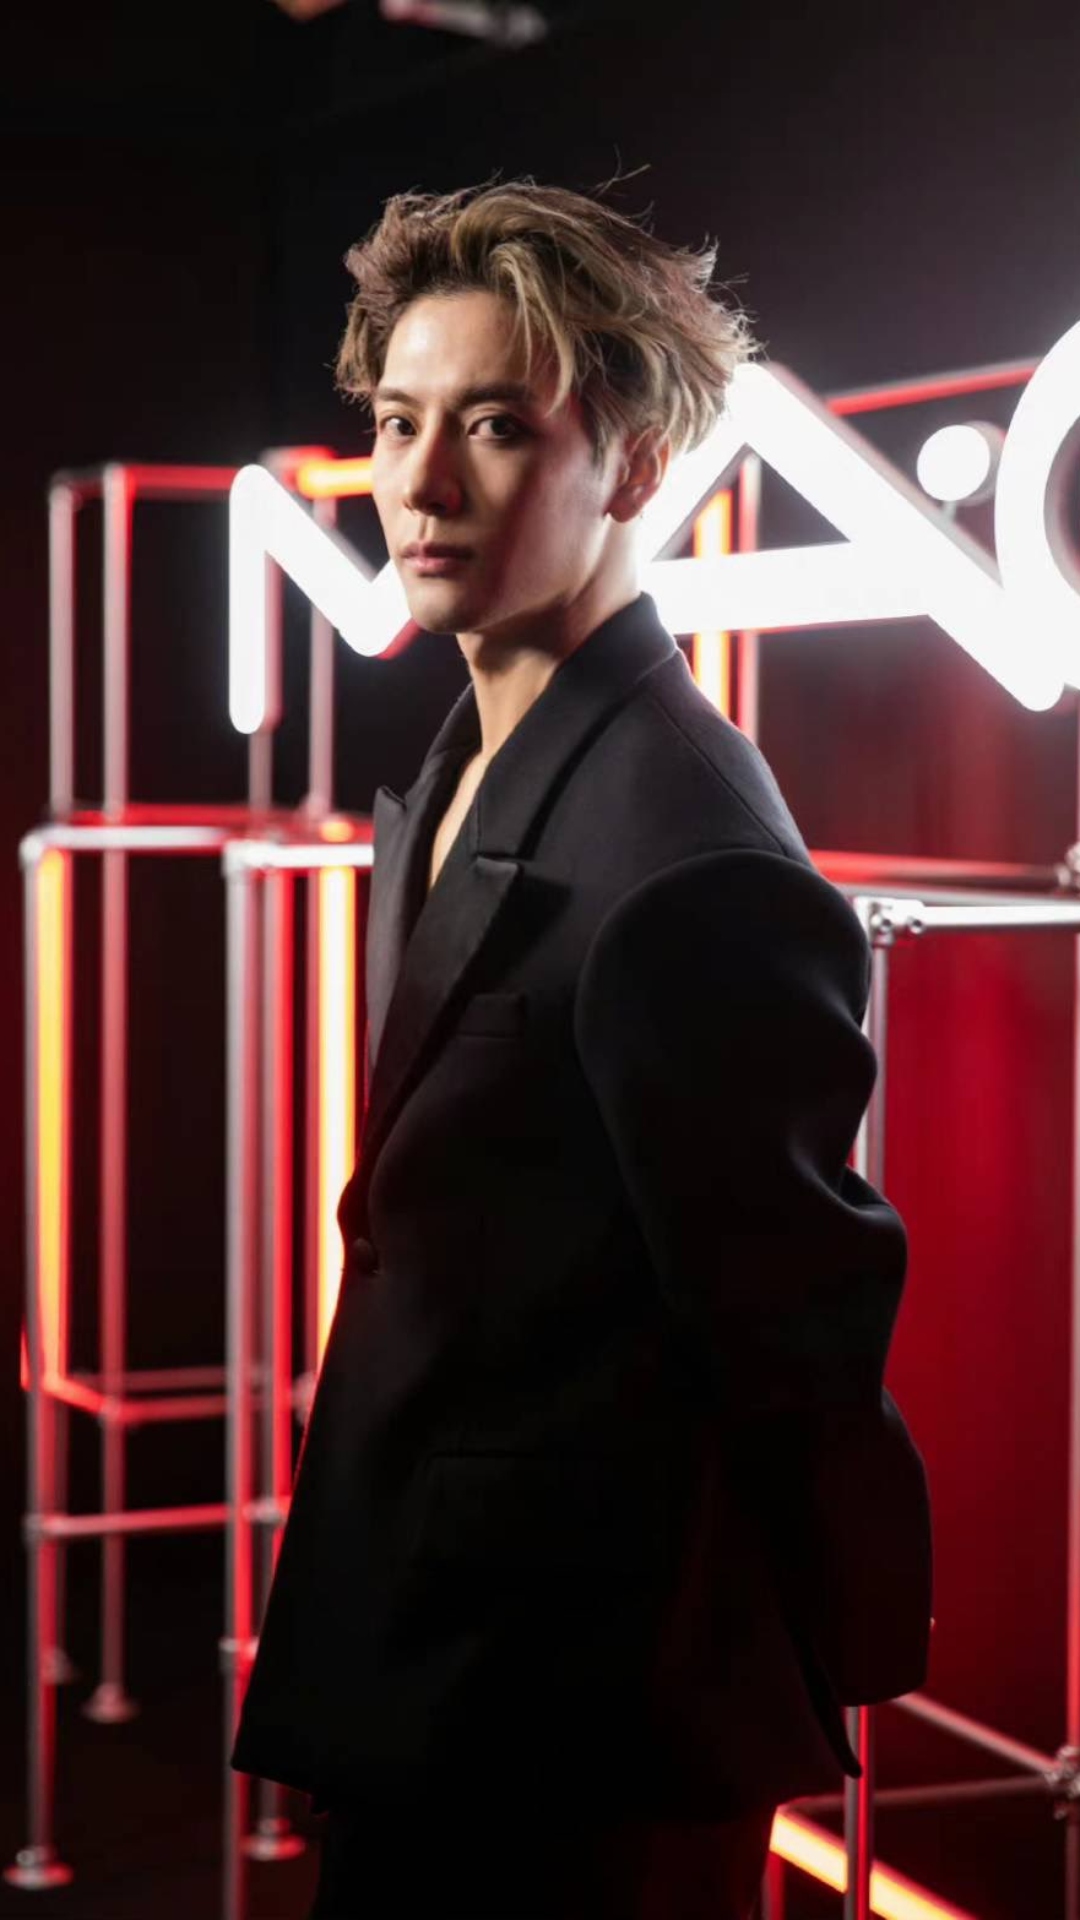 Jackson Wang breaks the internet with INSIDE videos from MAC after party.  Seen yet?